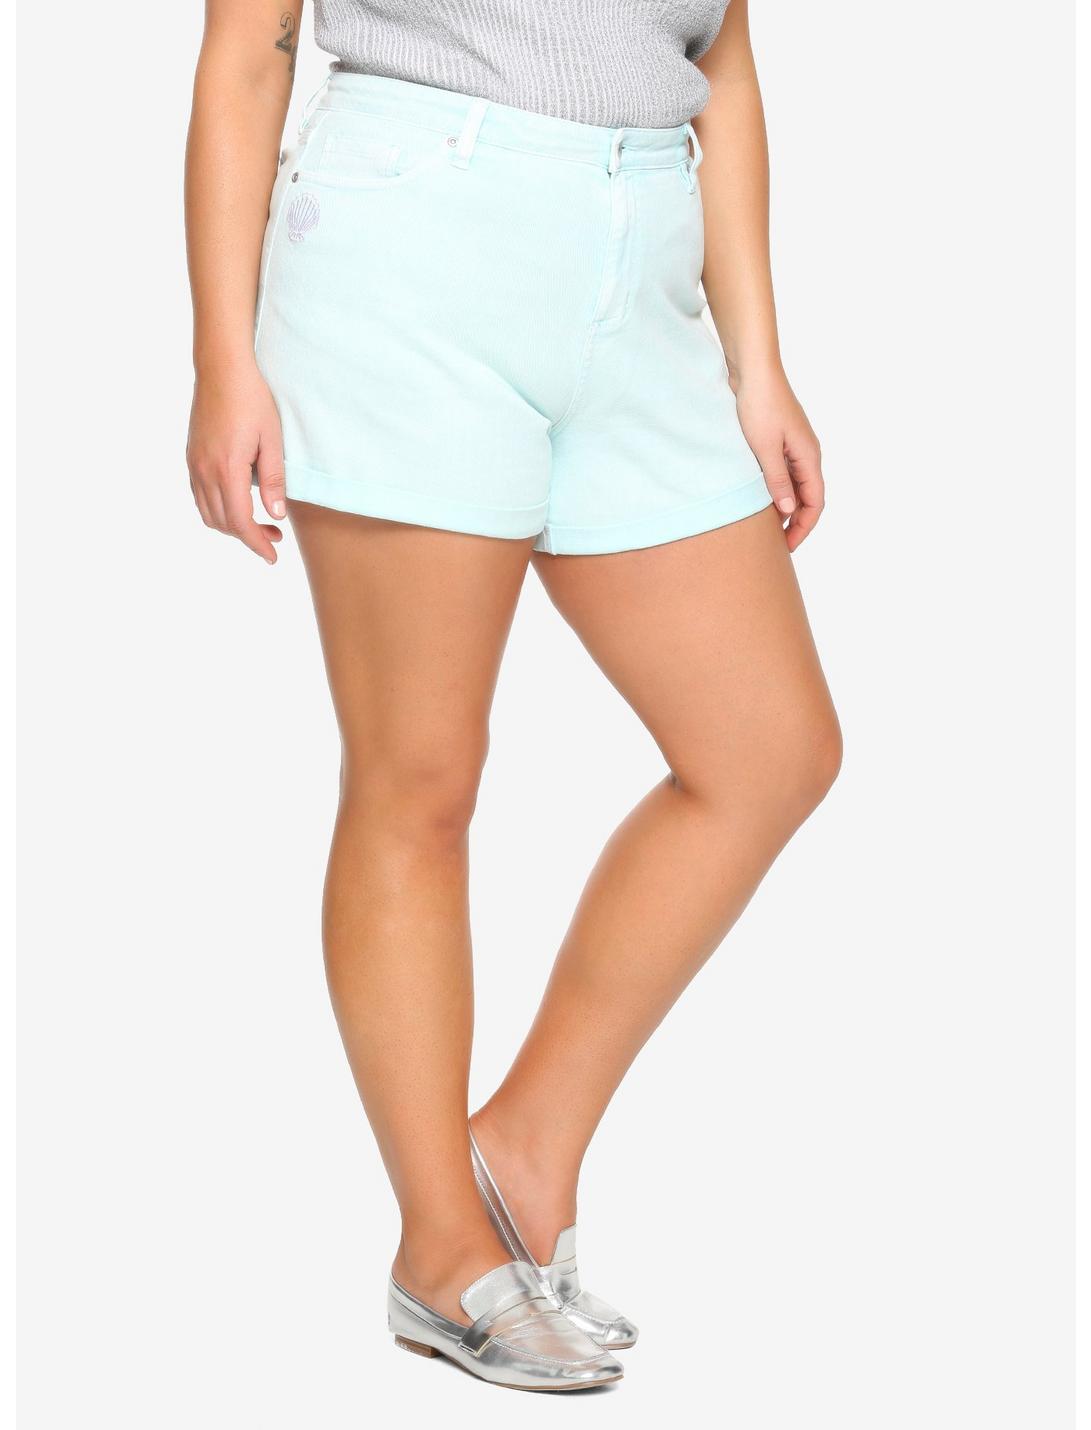 Her Universe Disney The Little Mermaid 30th Anniversary Pastel Mint Mom Shorts Plus Size, GREEN, hi-res